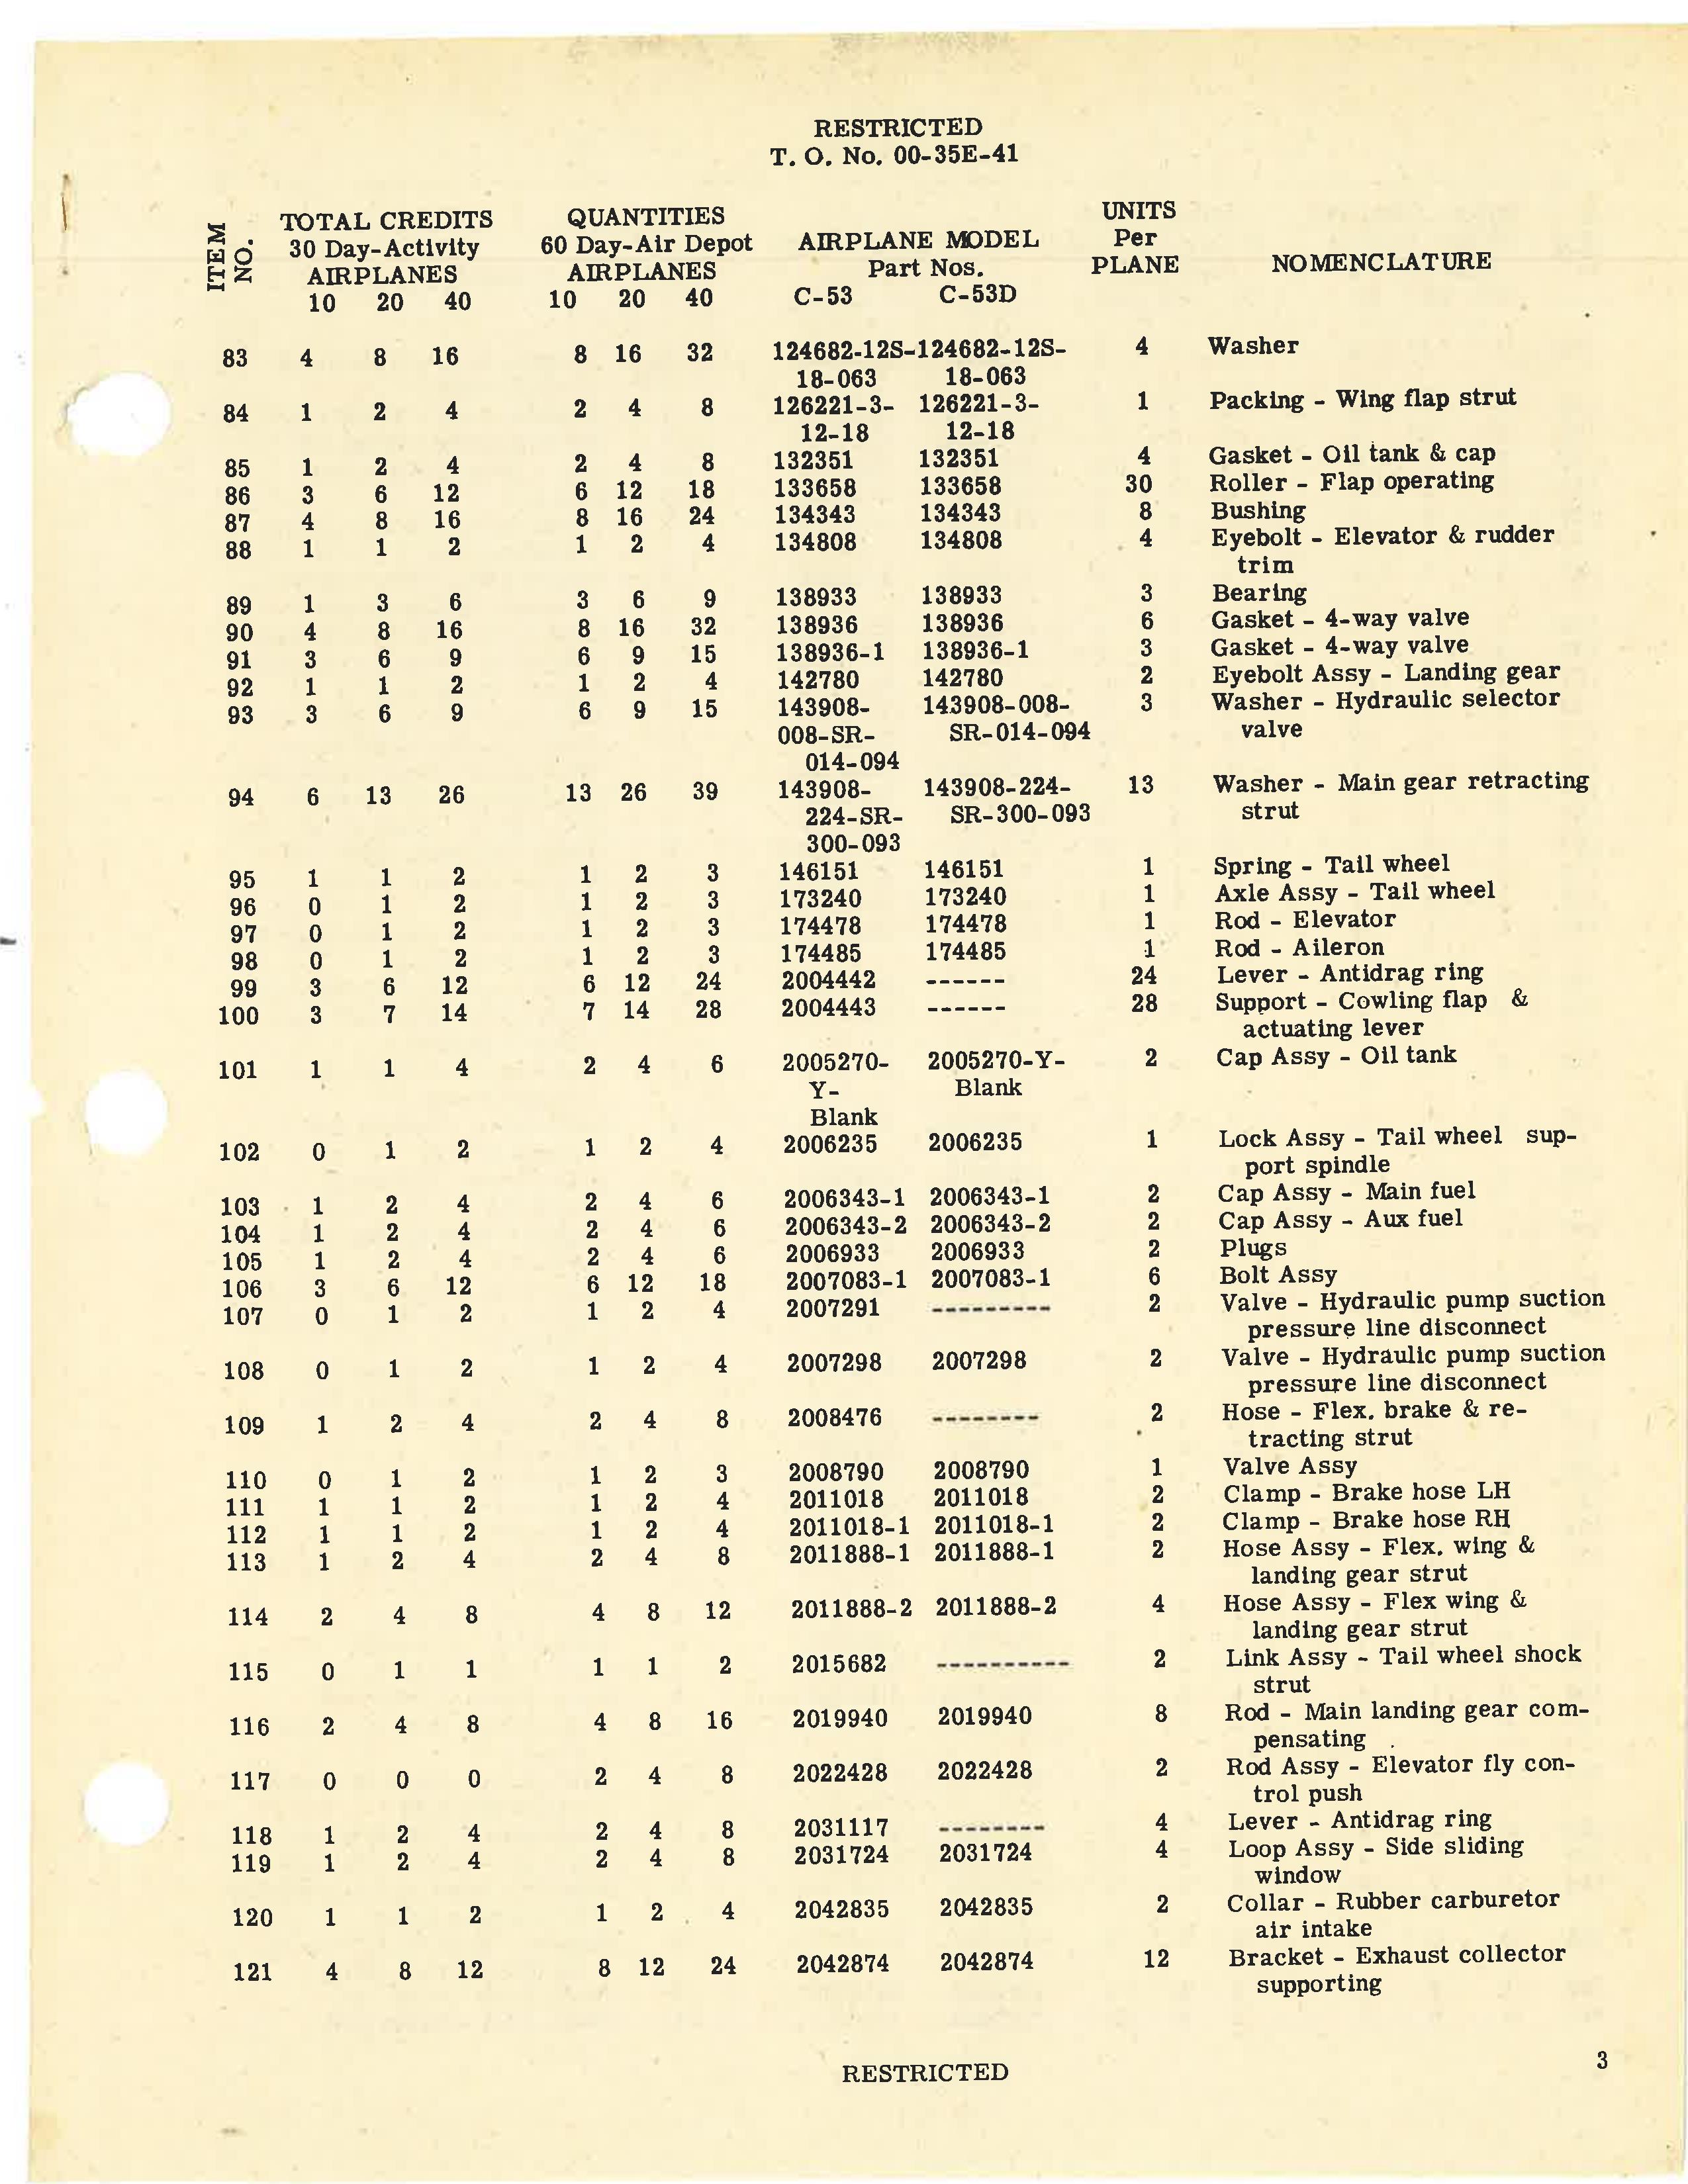 Sample page 5 from AirCorps Library document: Table of Credit Aircraft Maintenance Parts for C-53 and C-53D